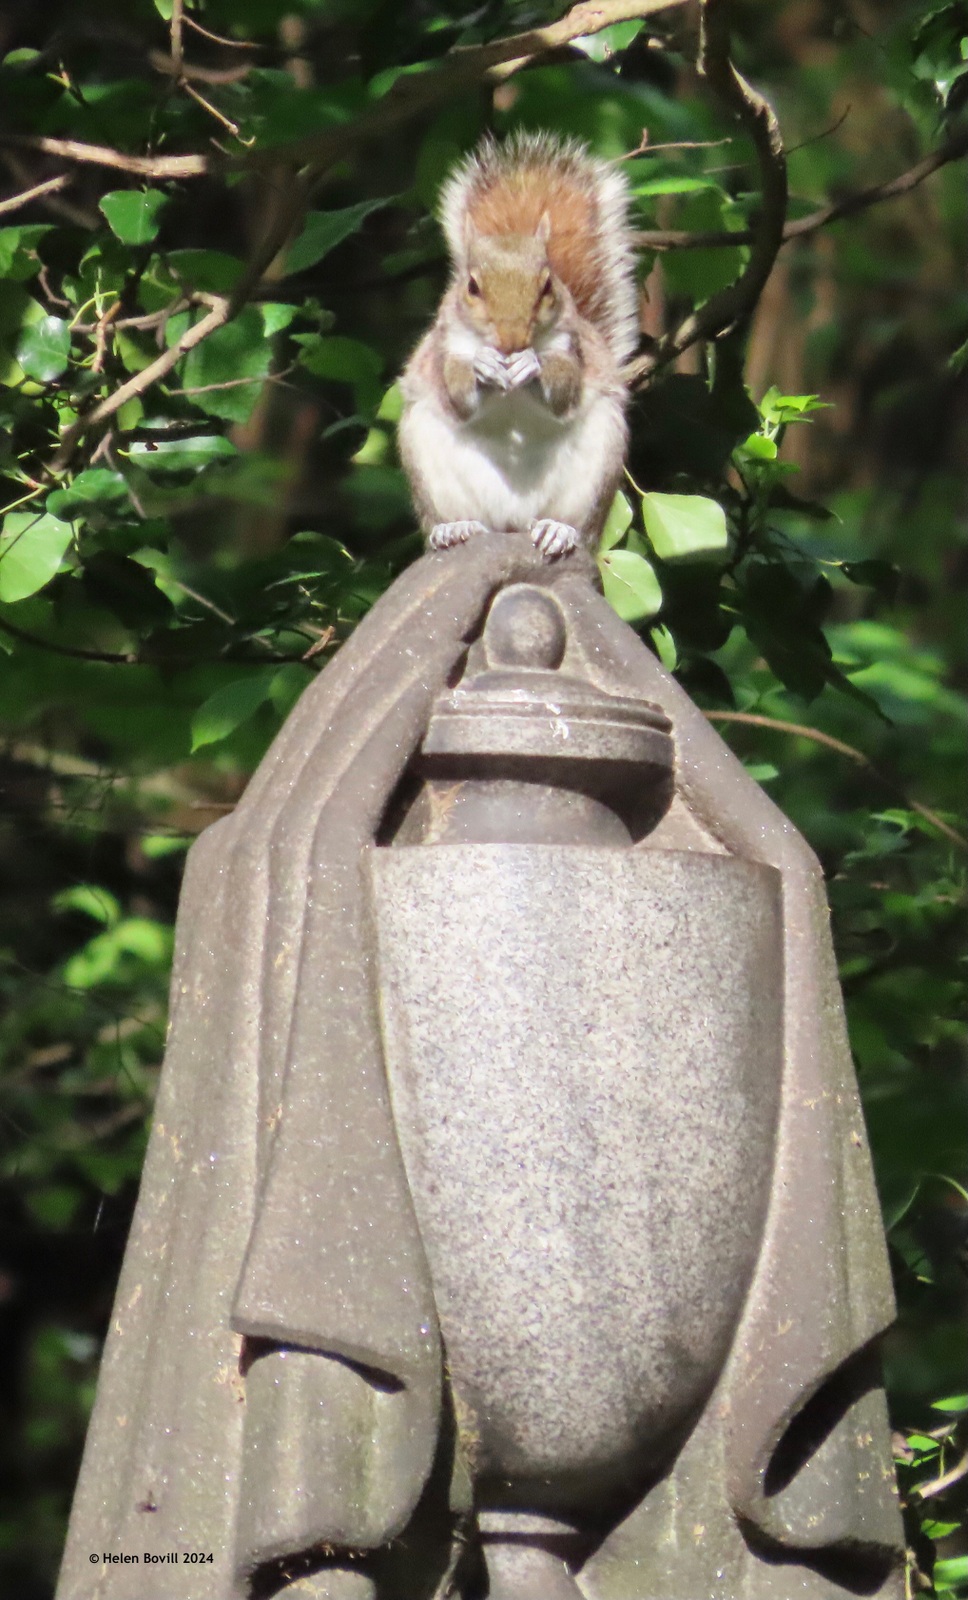 A squirrel perched on a headstone in the cemetery